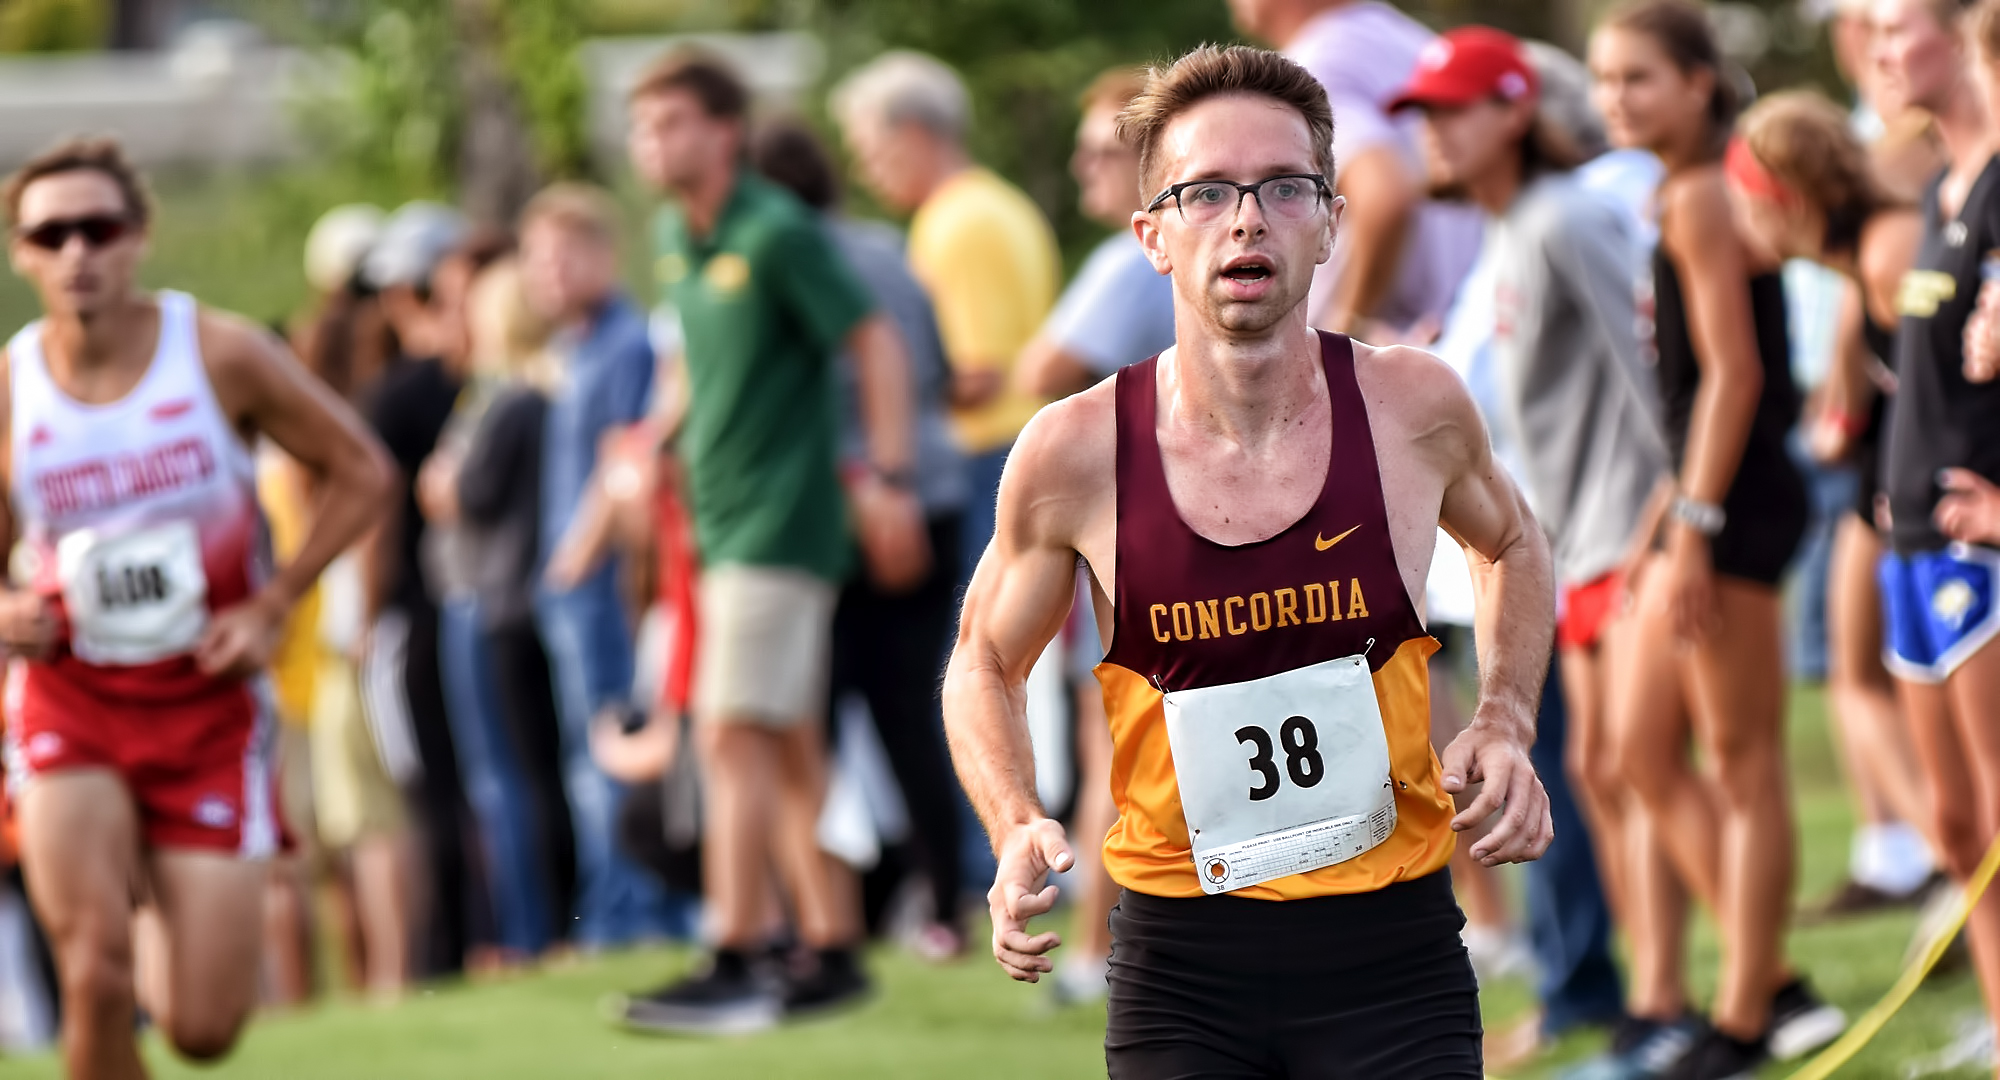 Senior Eric Wicklund crosses the finish line at the NDSU Bison Open. He earned MIAC Athlete of the Week honors for his stellar season-opening outing.